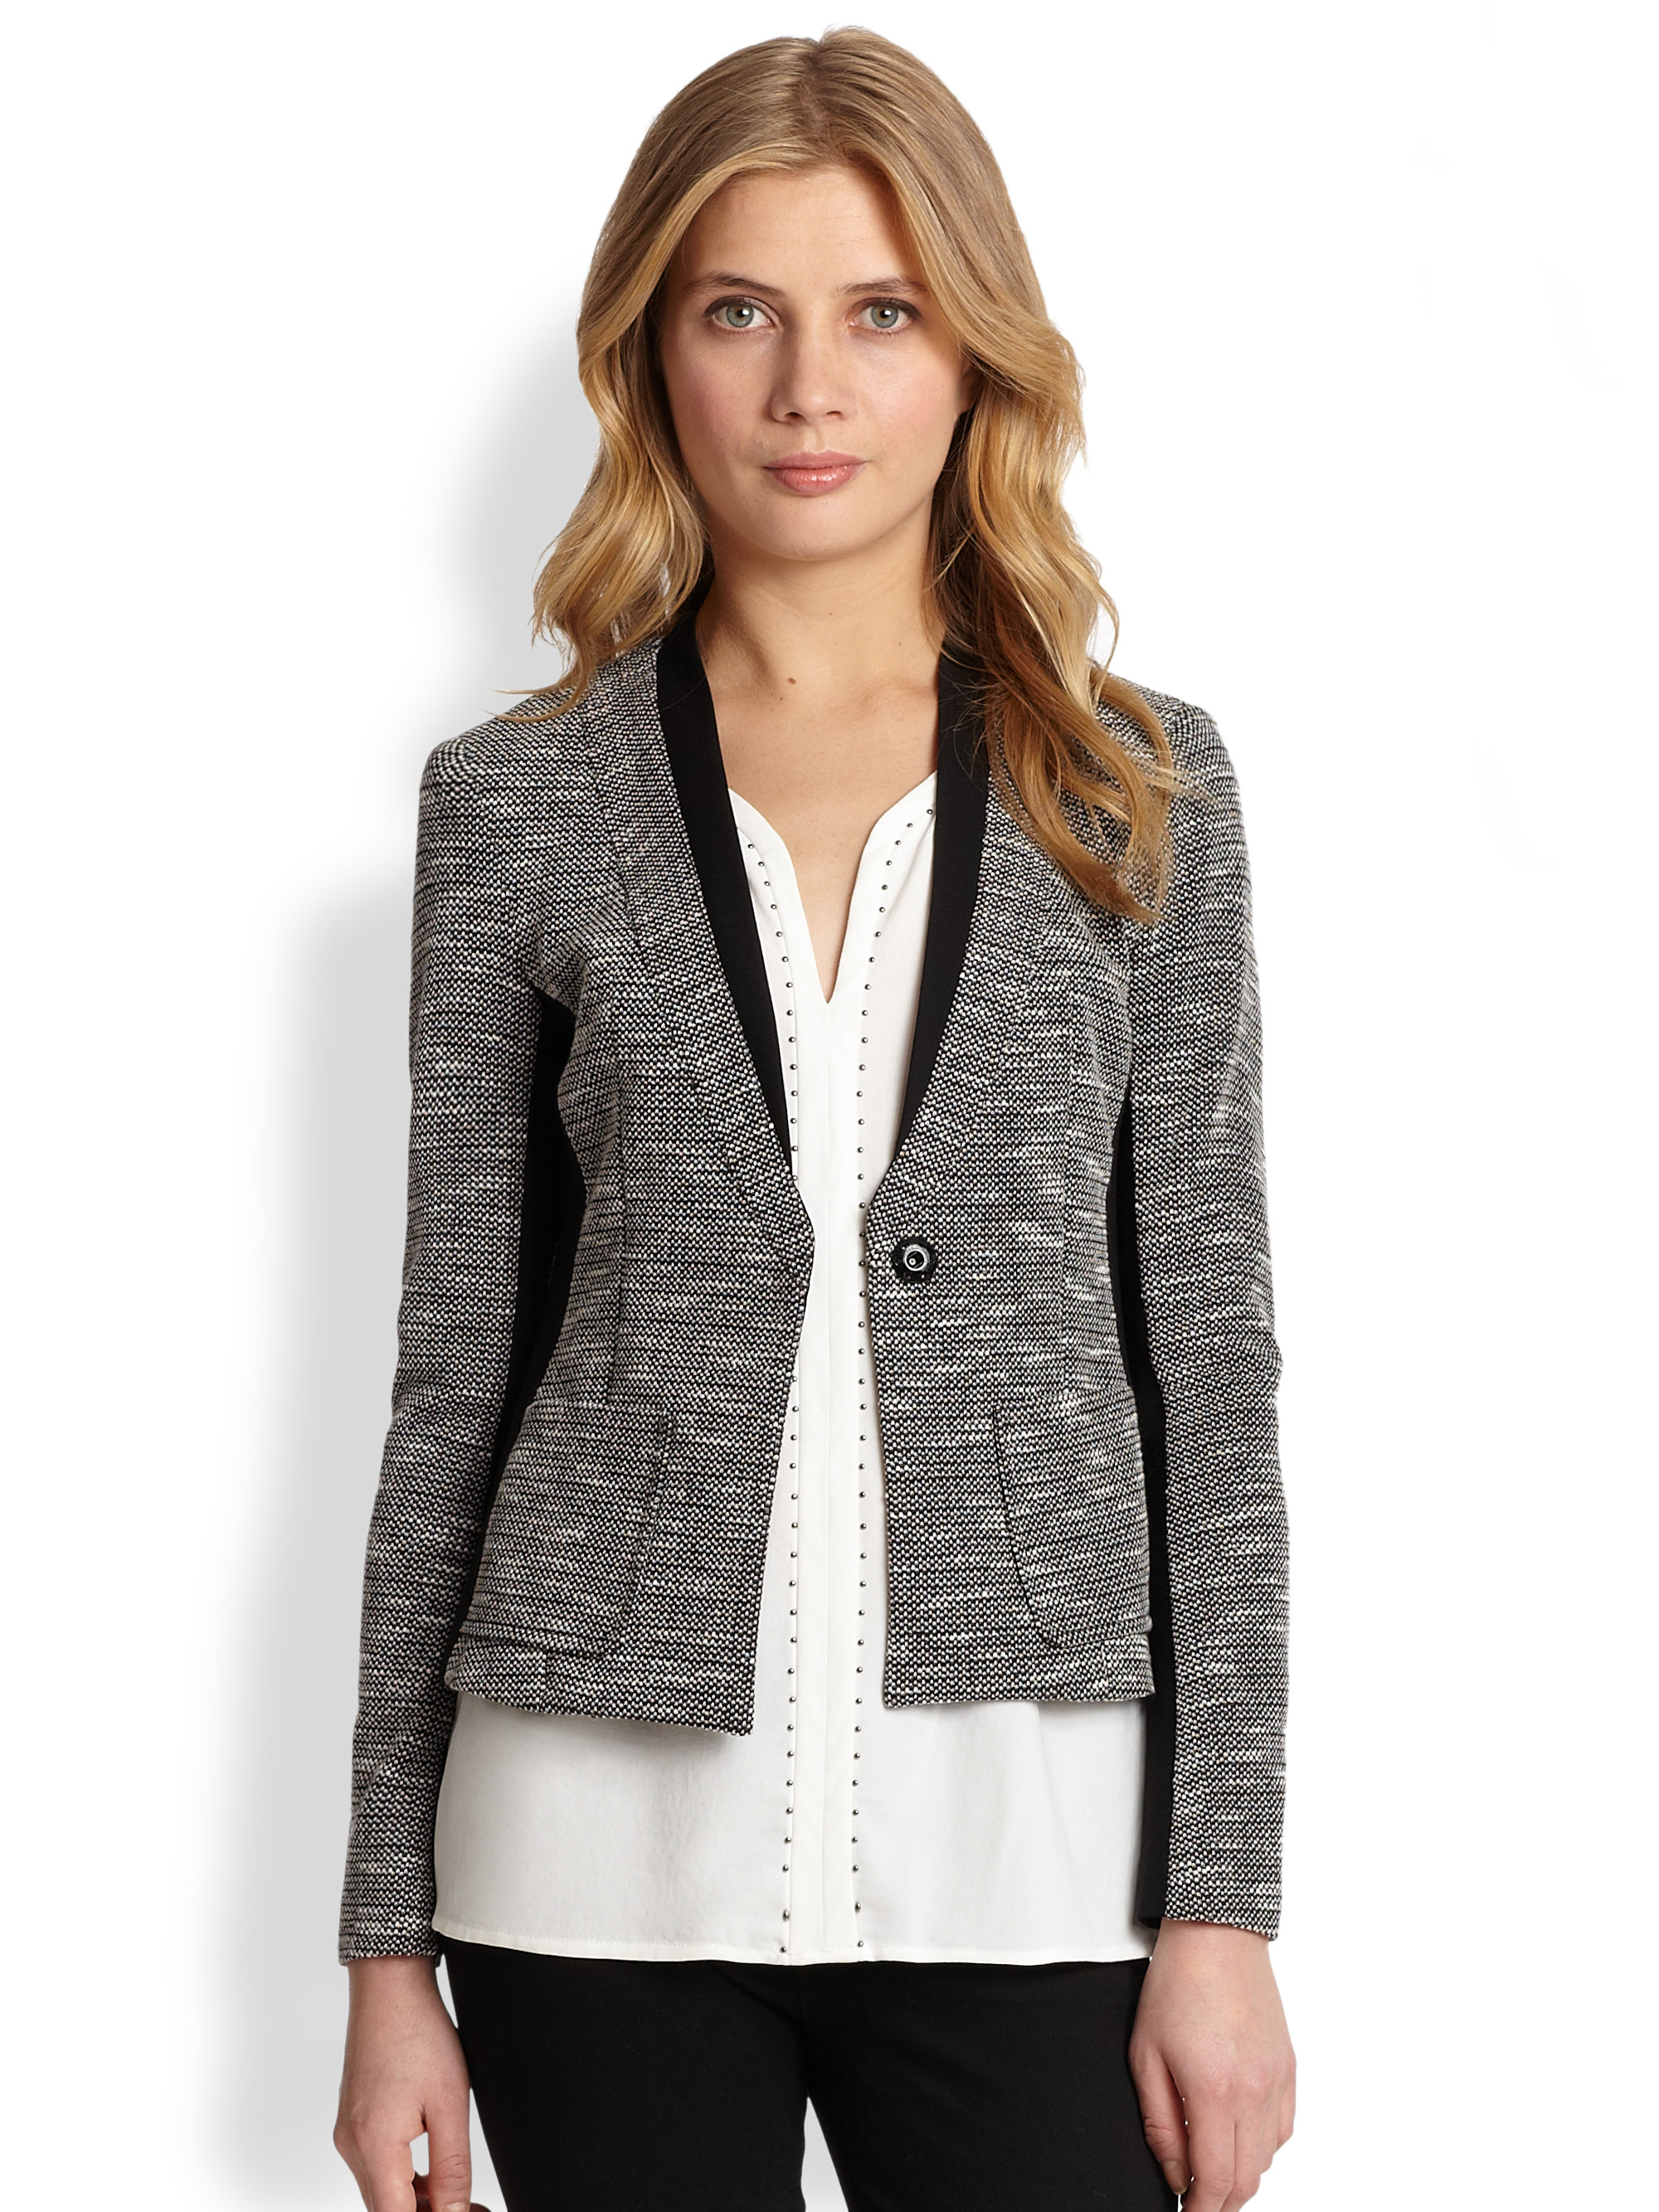 Nanette Lepore Perfect Match Jacket in Gray - Lyst